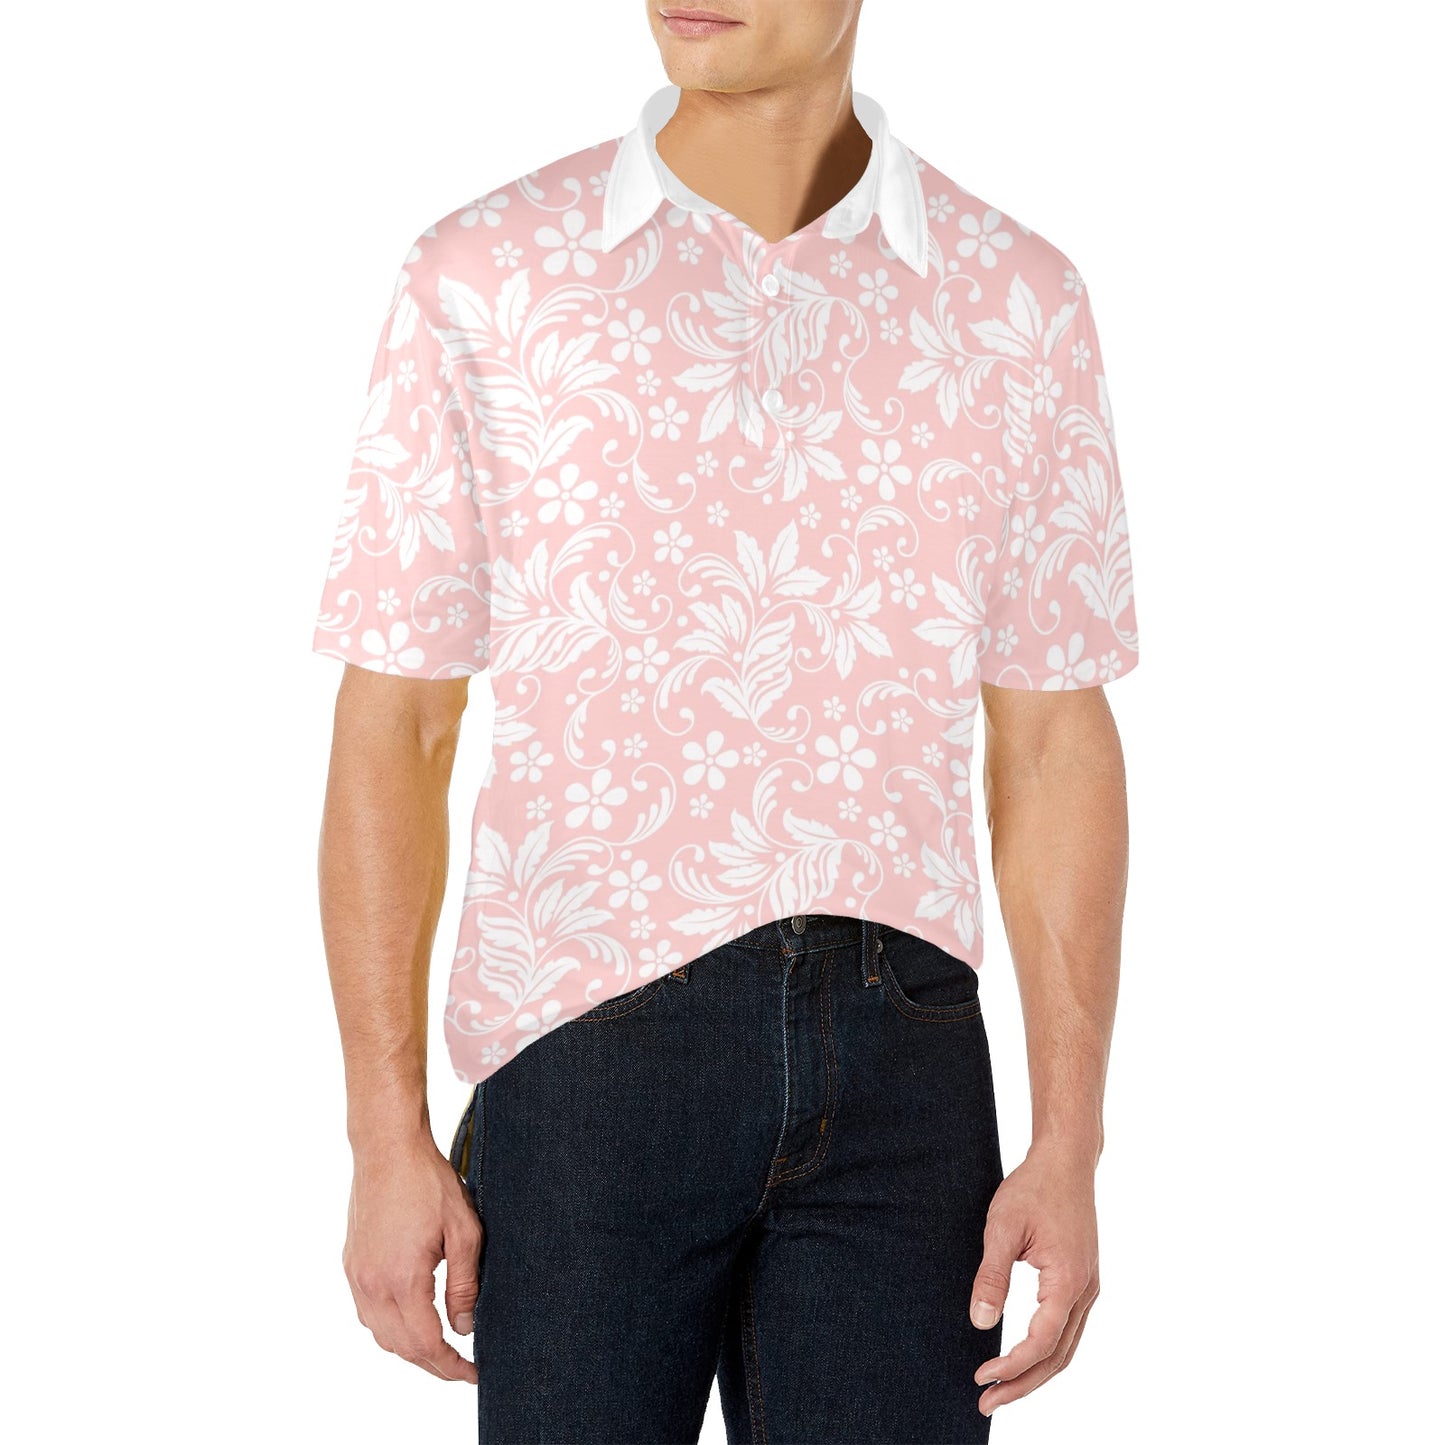 Pink White Floral Men Polo Shirt, Vintage Flowers Short Sleeve Classic Collared Male Button Down Up Rugby Golf Gift Guys Tee Tshirt